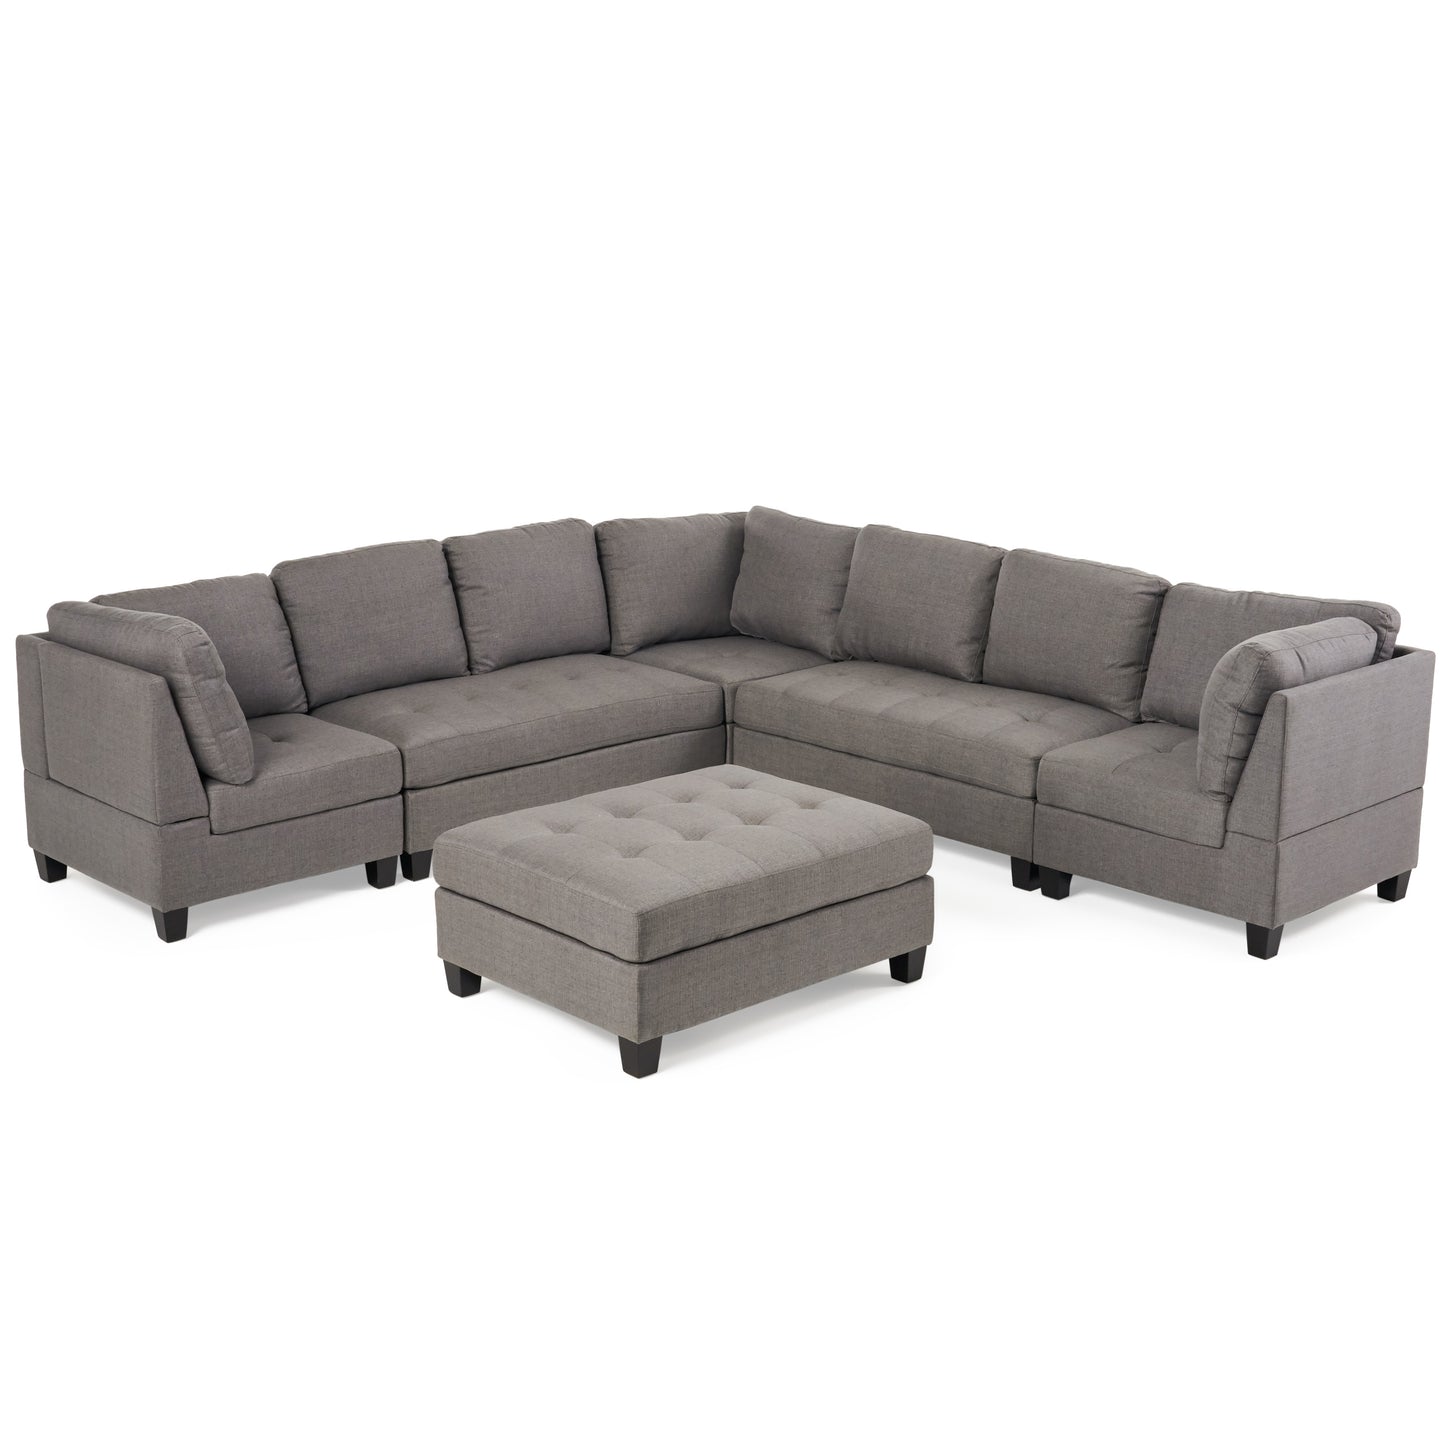 Jakyri Contemporary 7 Seater Fabric Sectional